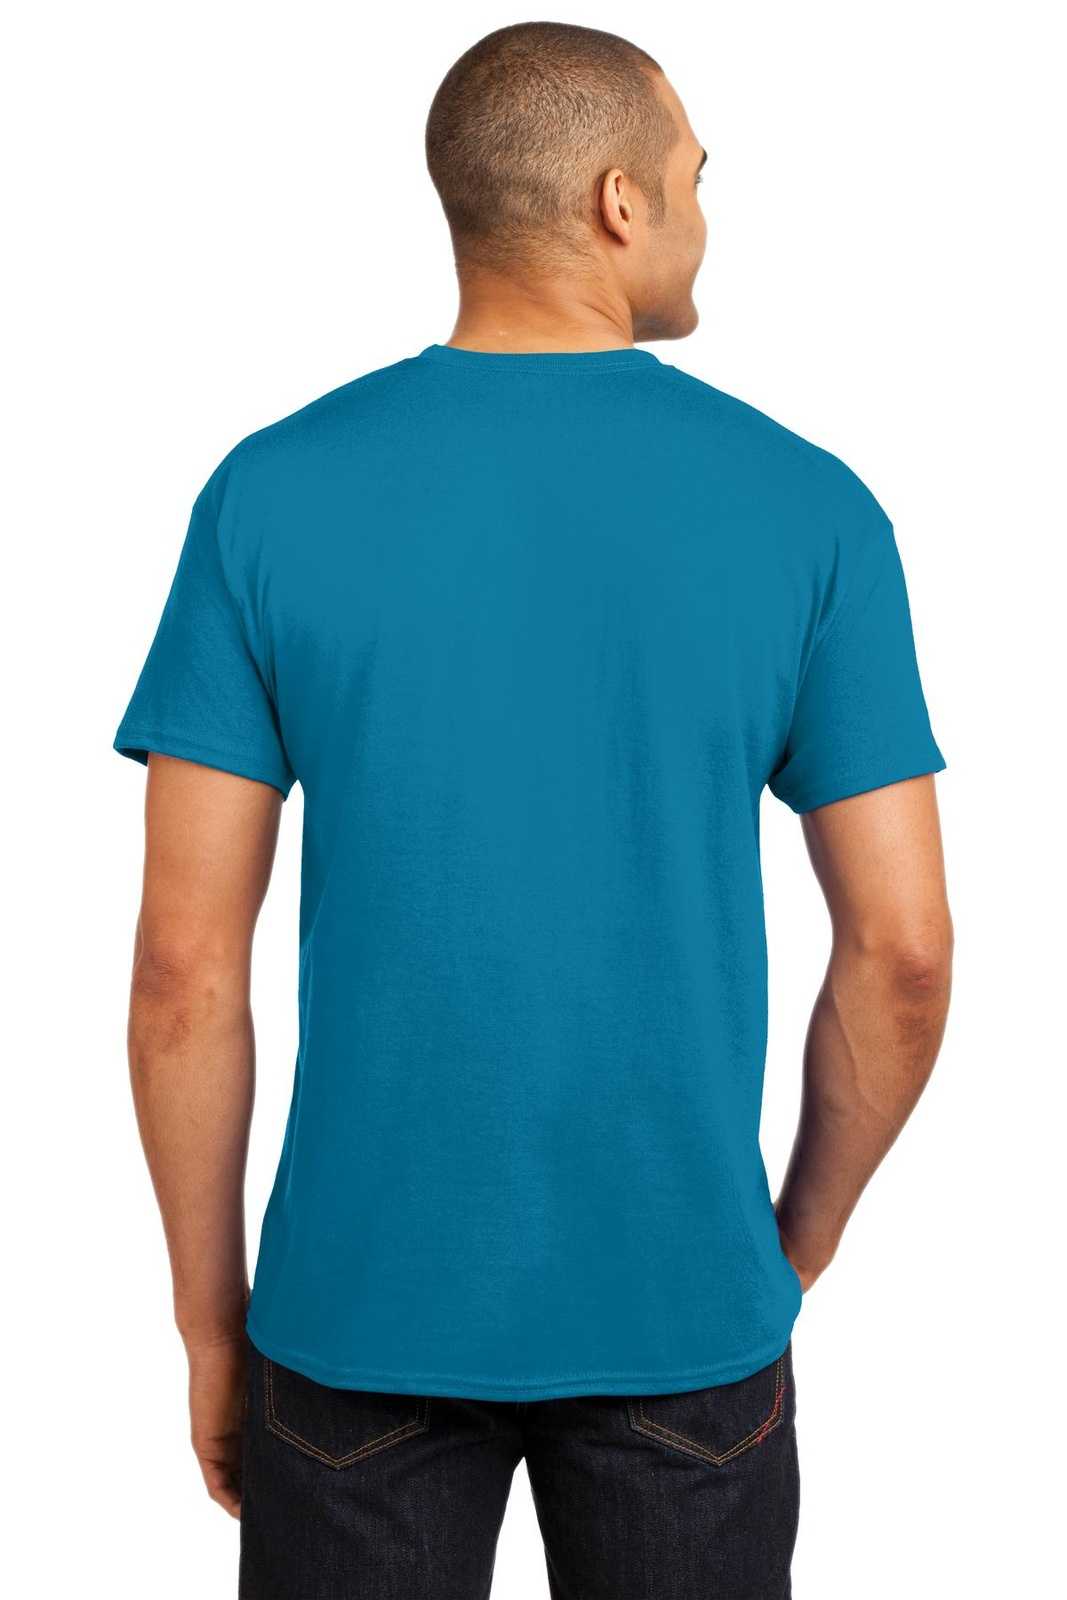 Hanes 5170 Ecosmart 50/50 Cotton/Poly T-Shirt - Teal - HIT a Double